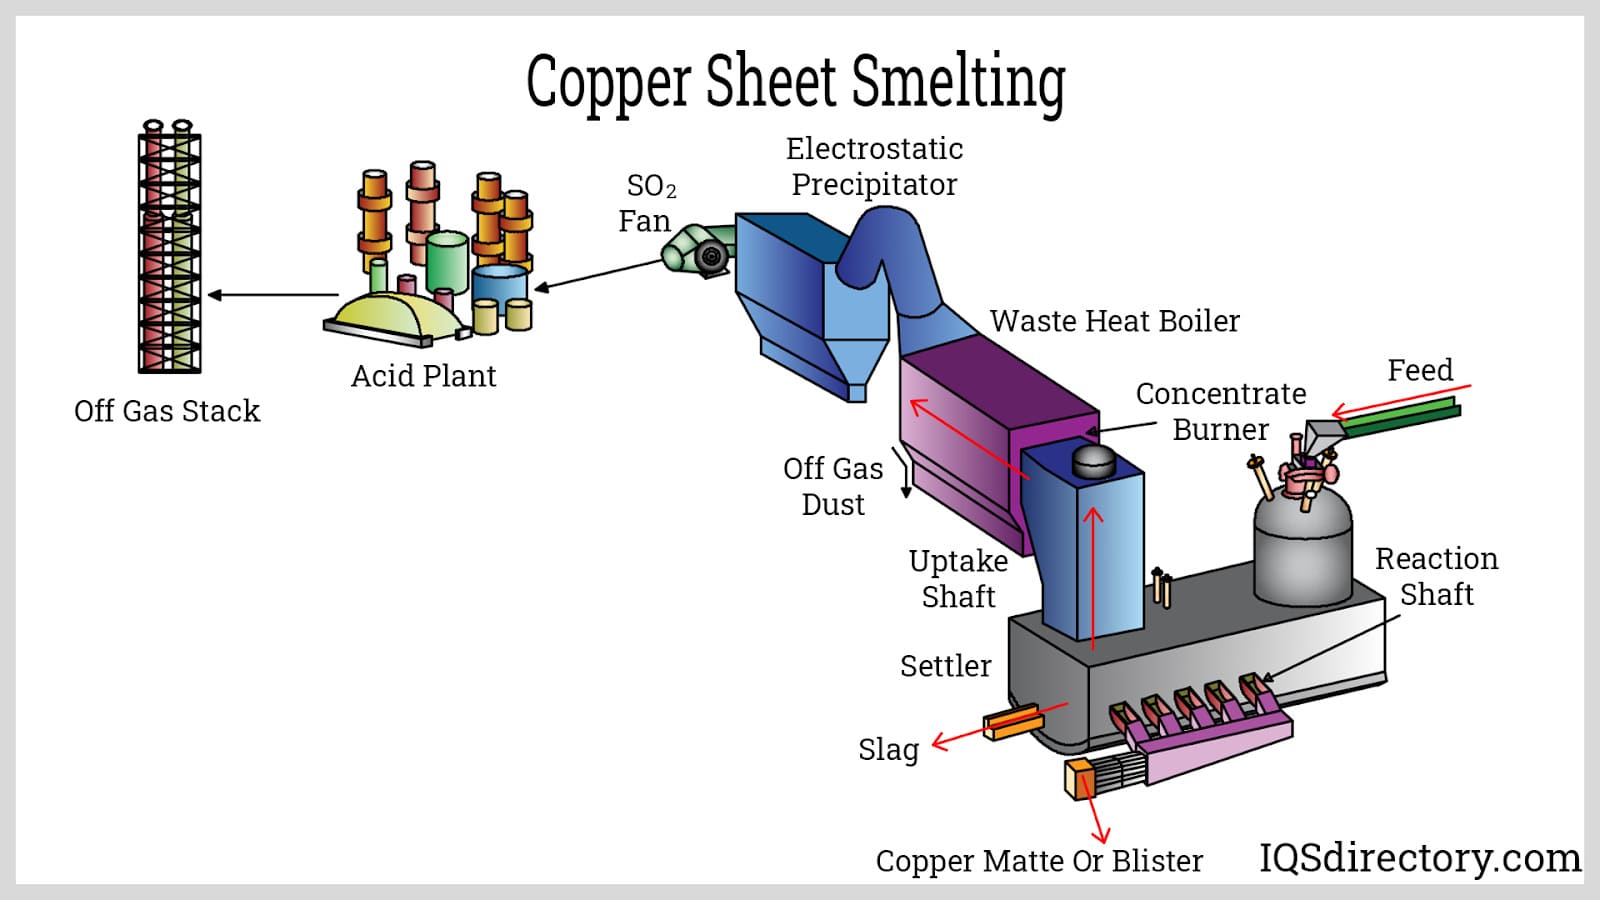 File:BR stainlessless steel starter sheets for copper refining.png -  Wikipedia